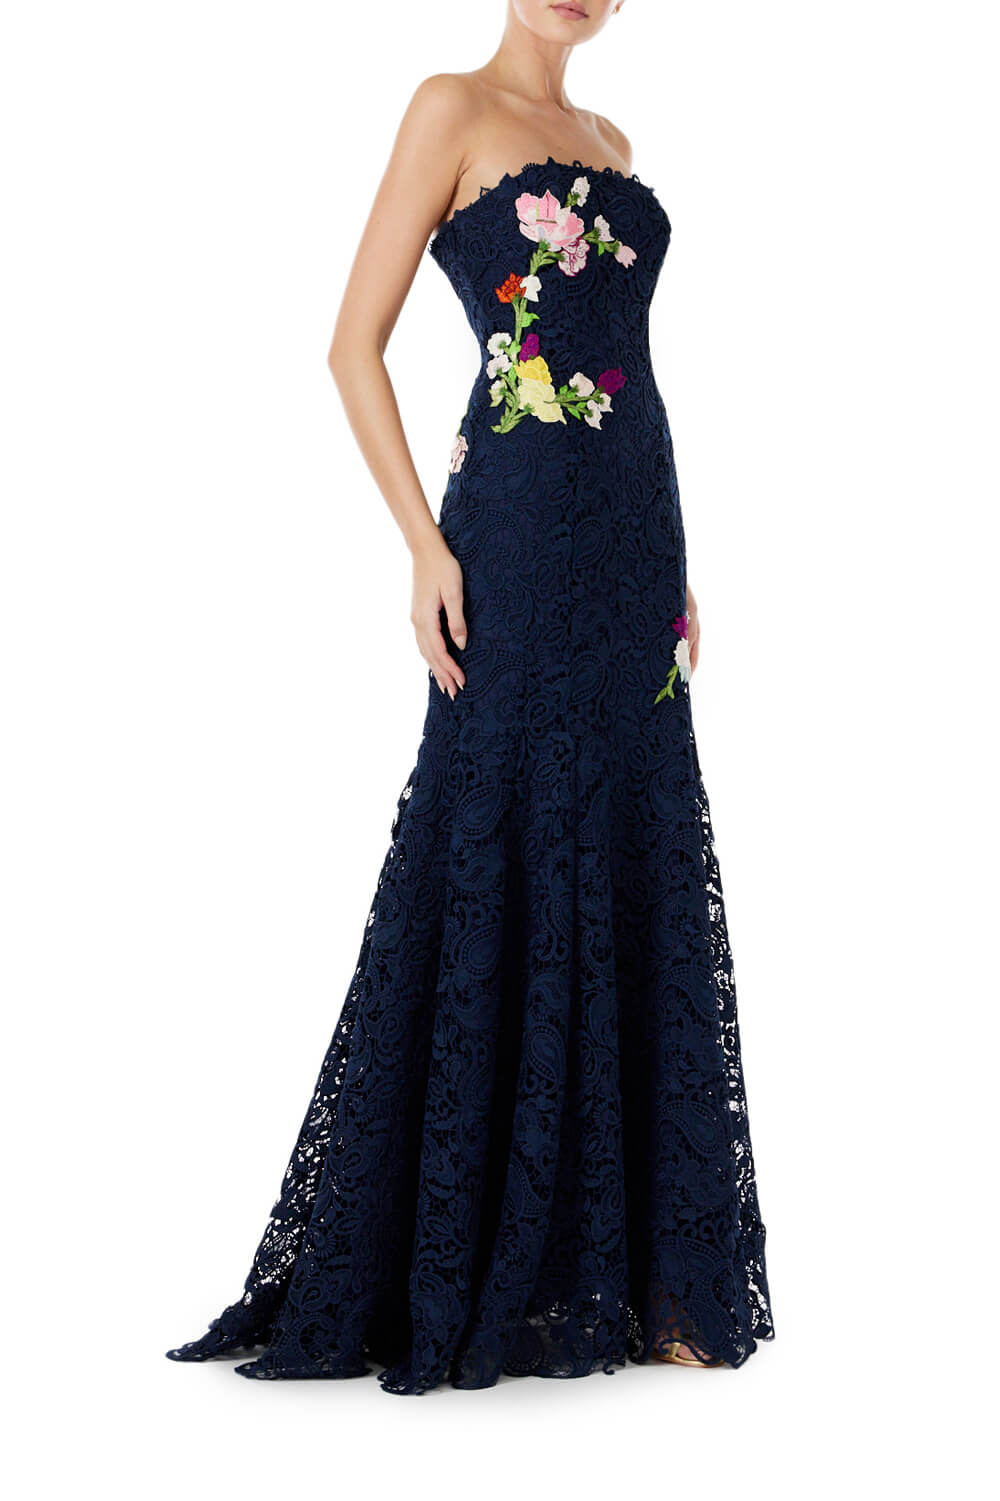 Monique Lhuillier strapless navy lace gown with multi color floral embroidery.